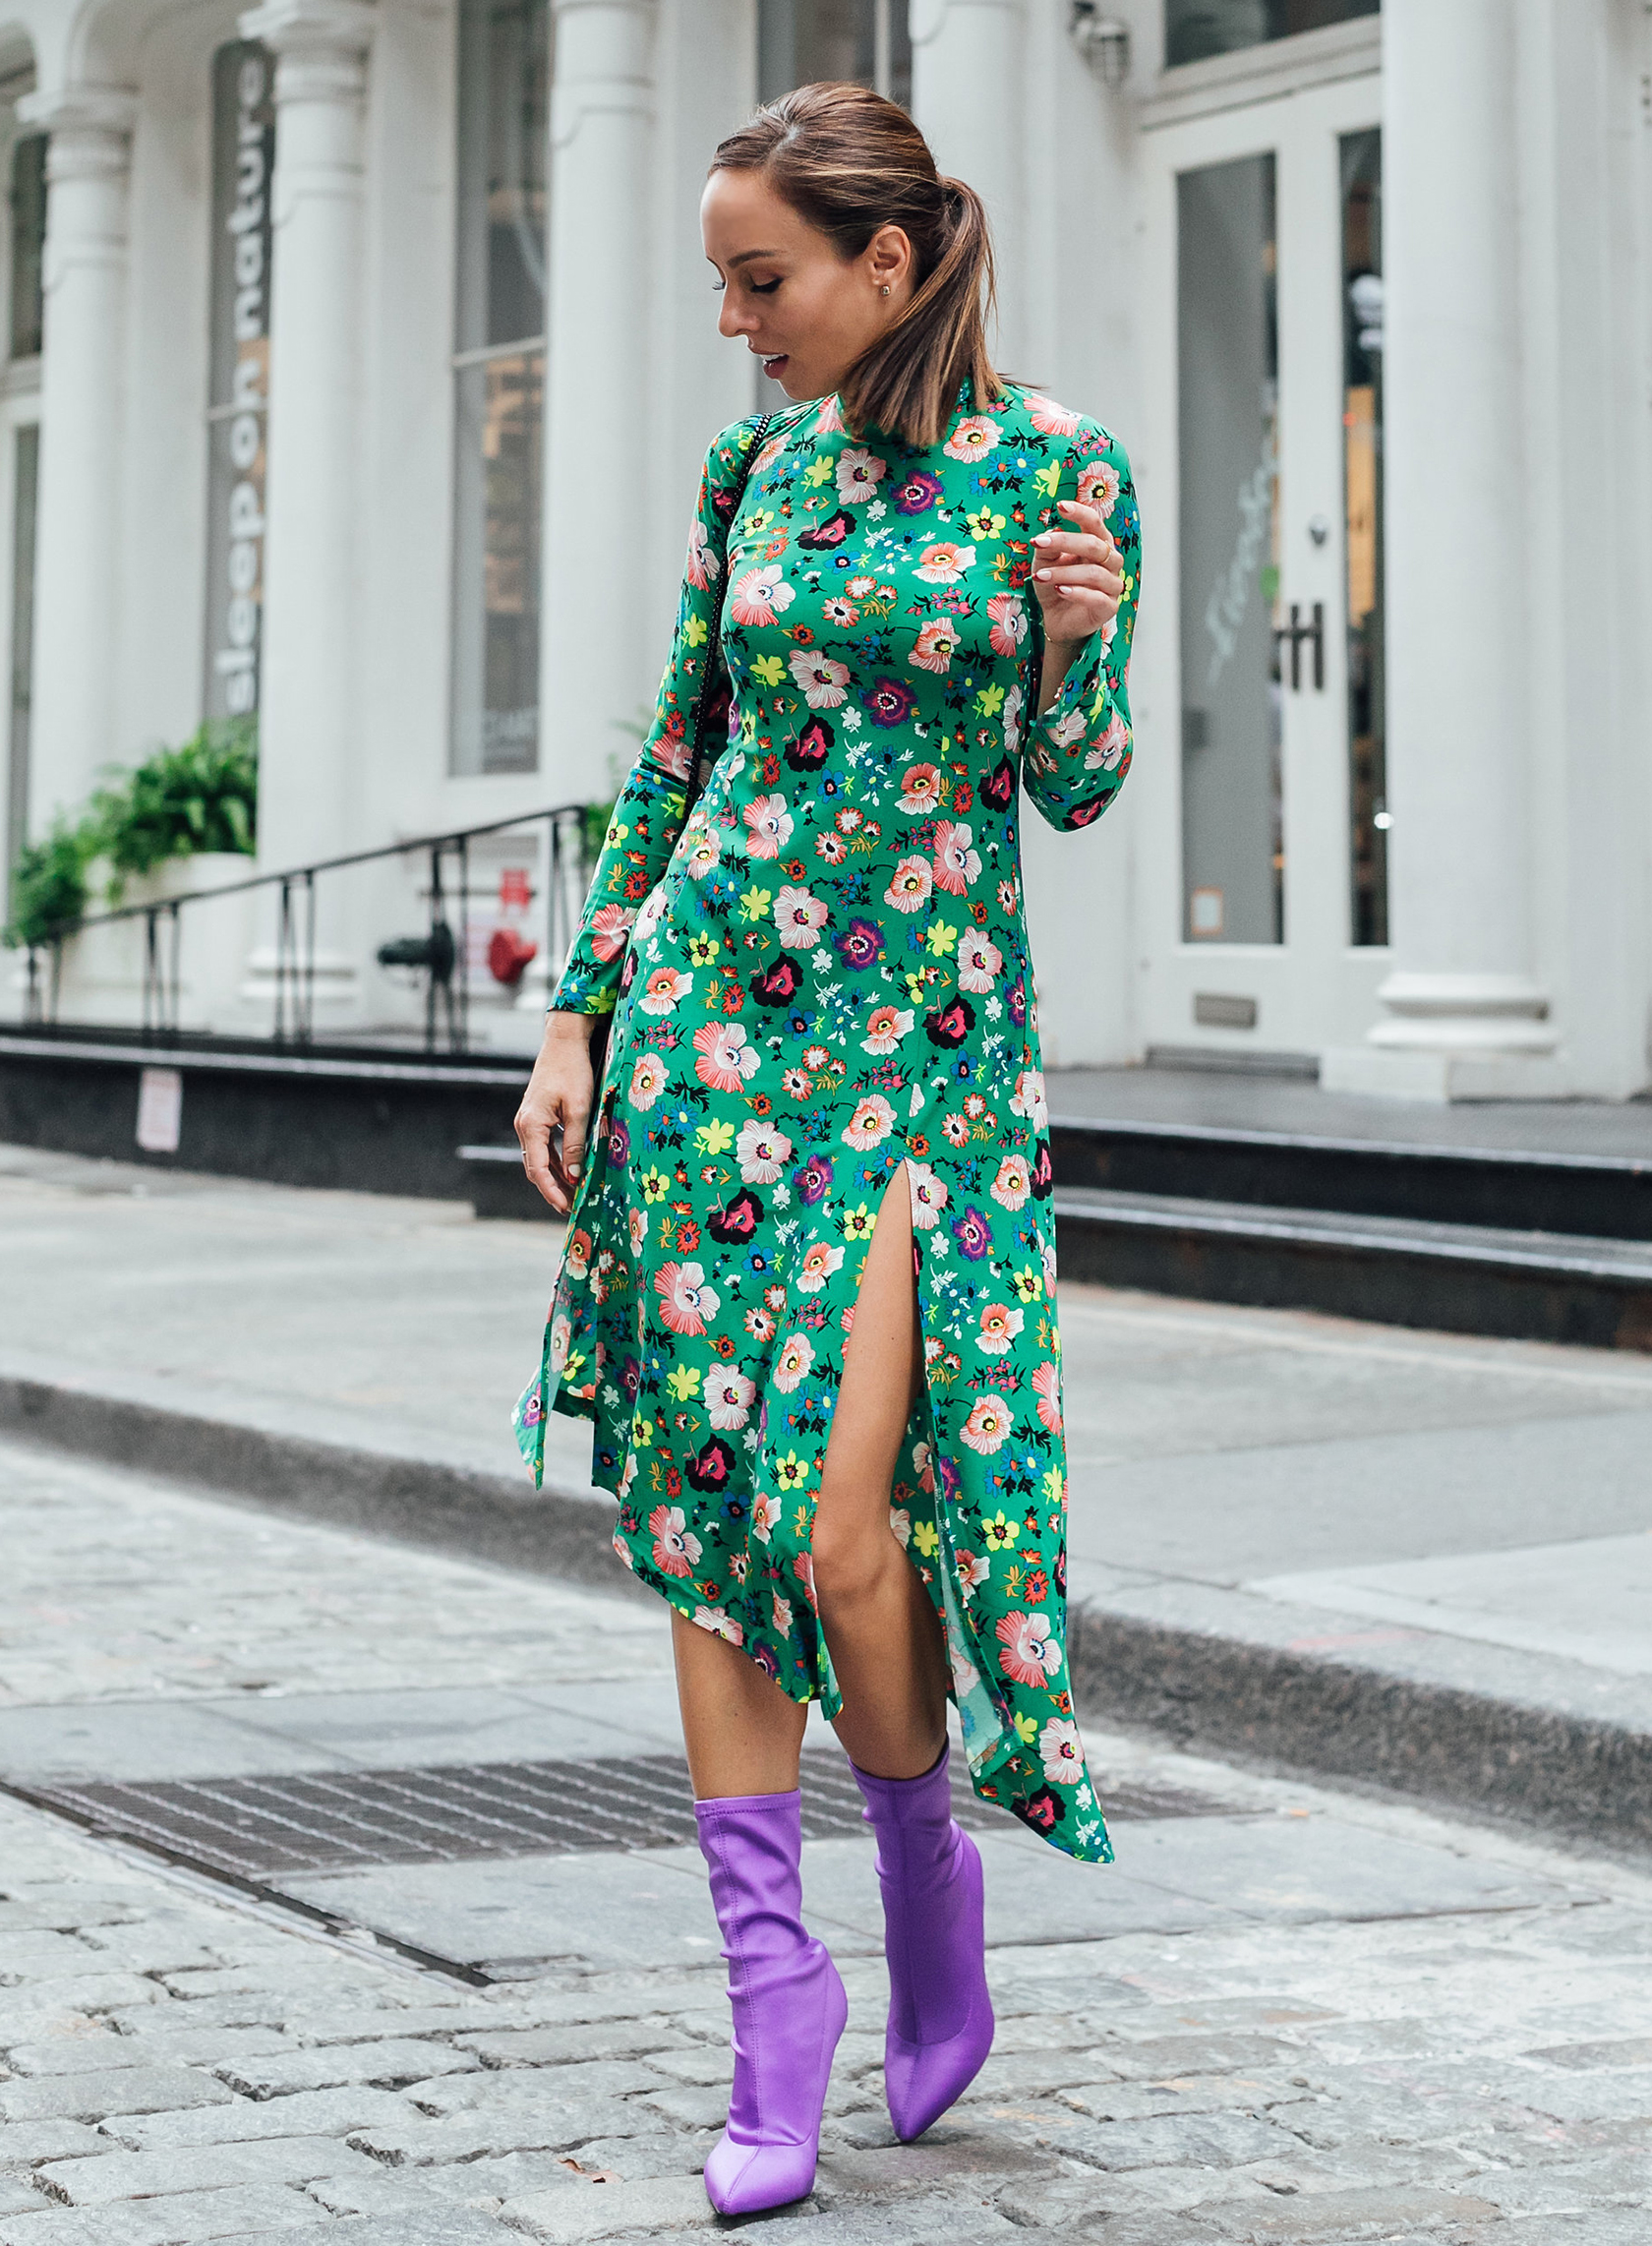 Everyday london fashion trends 20